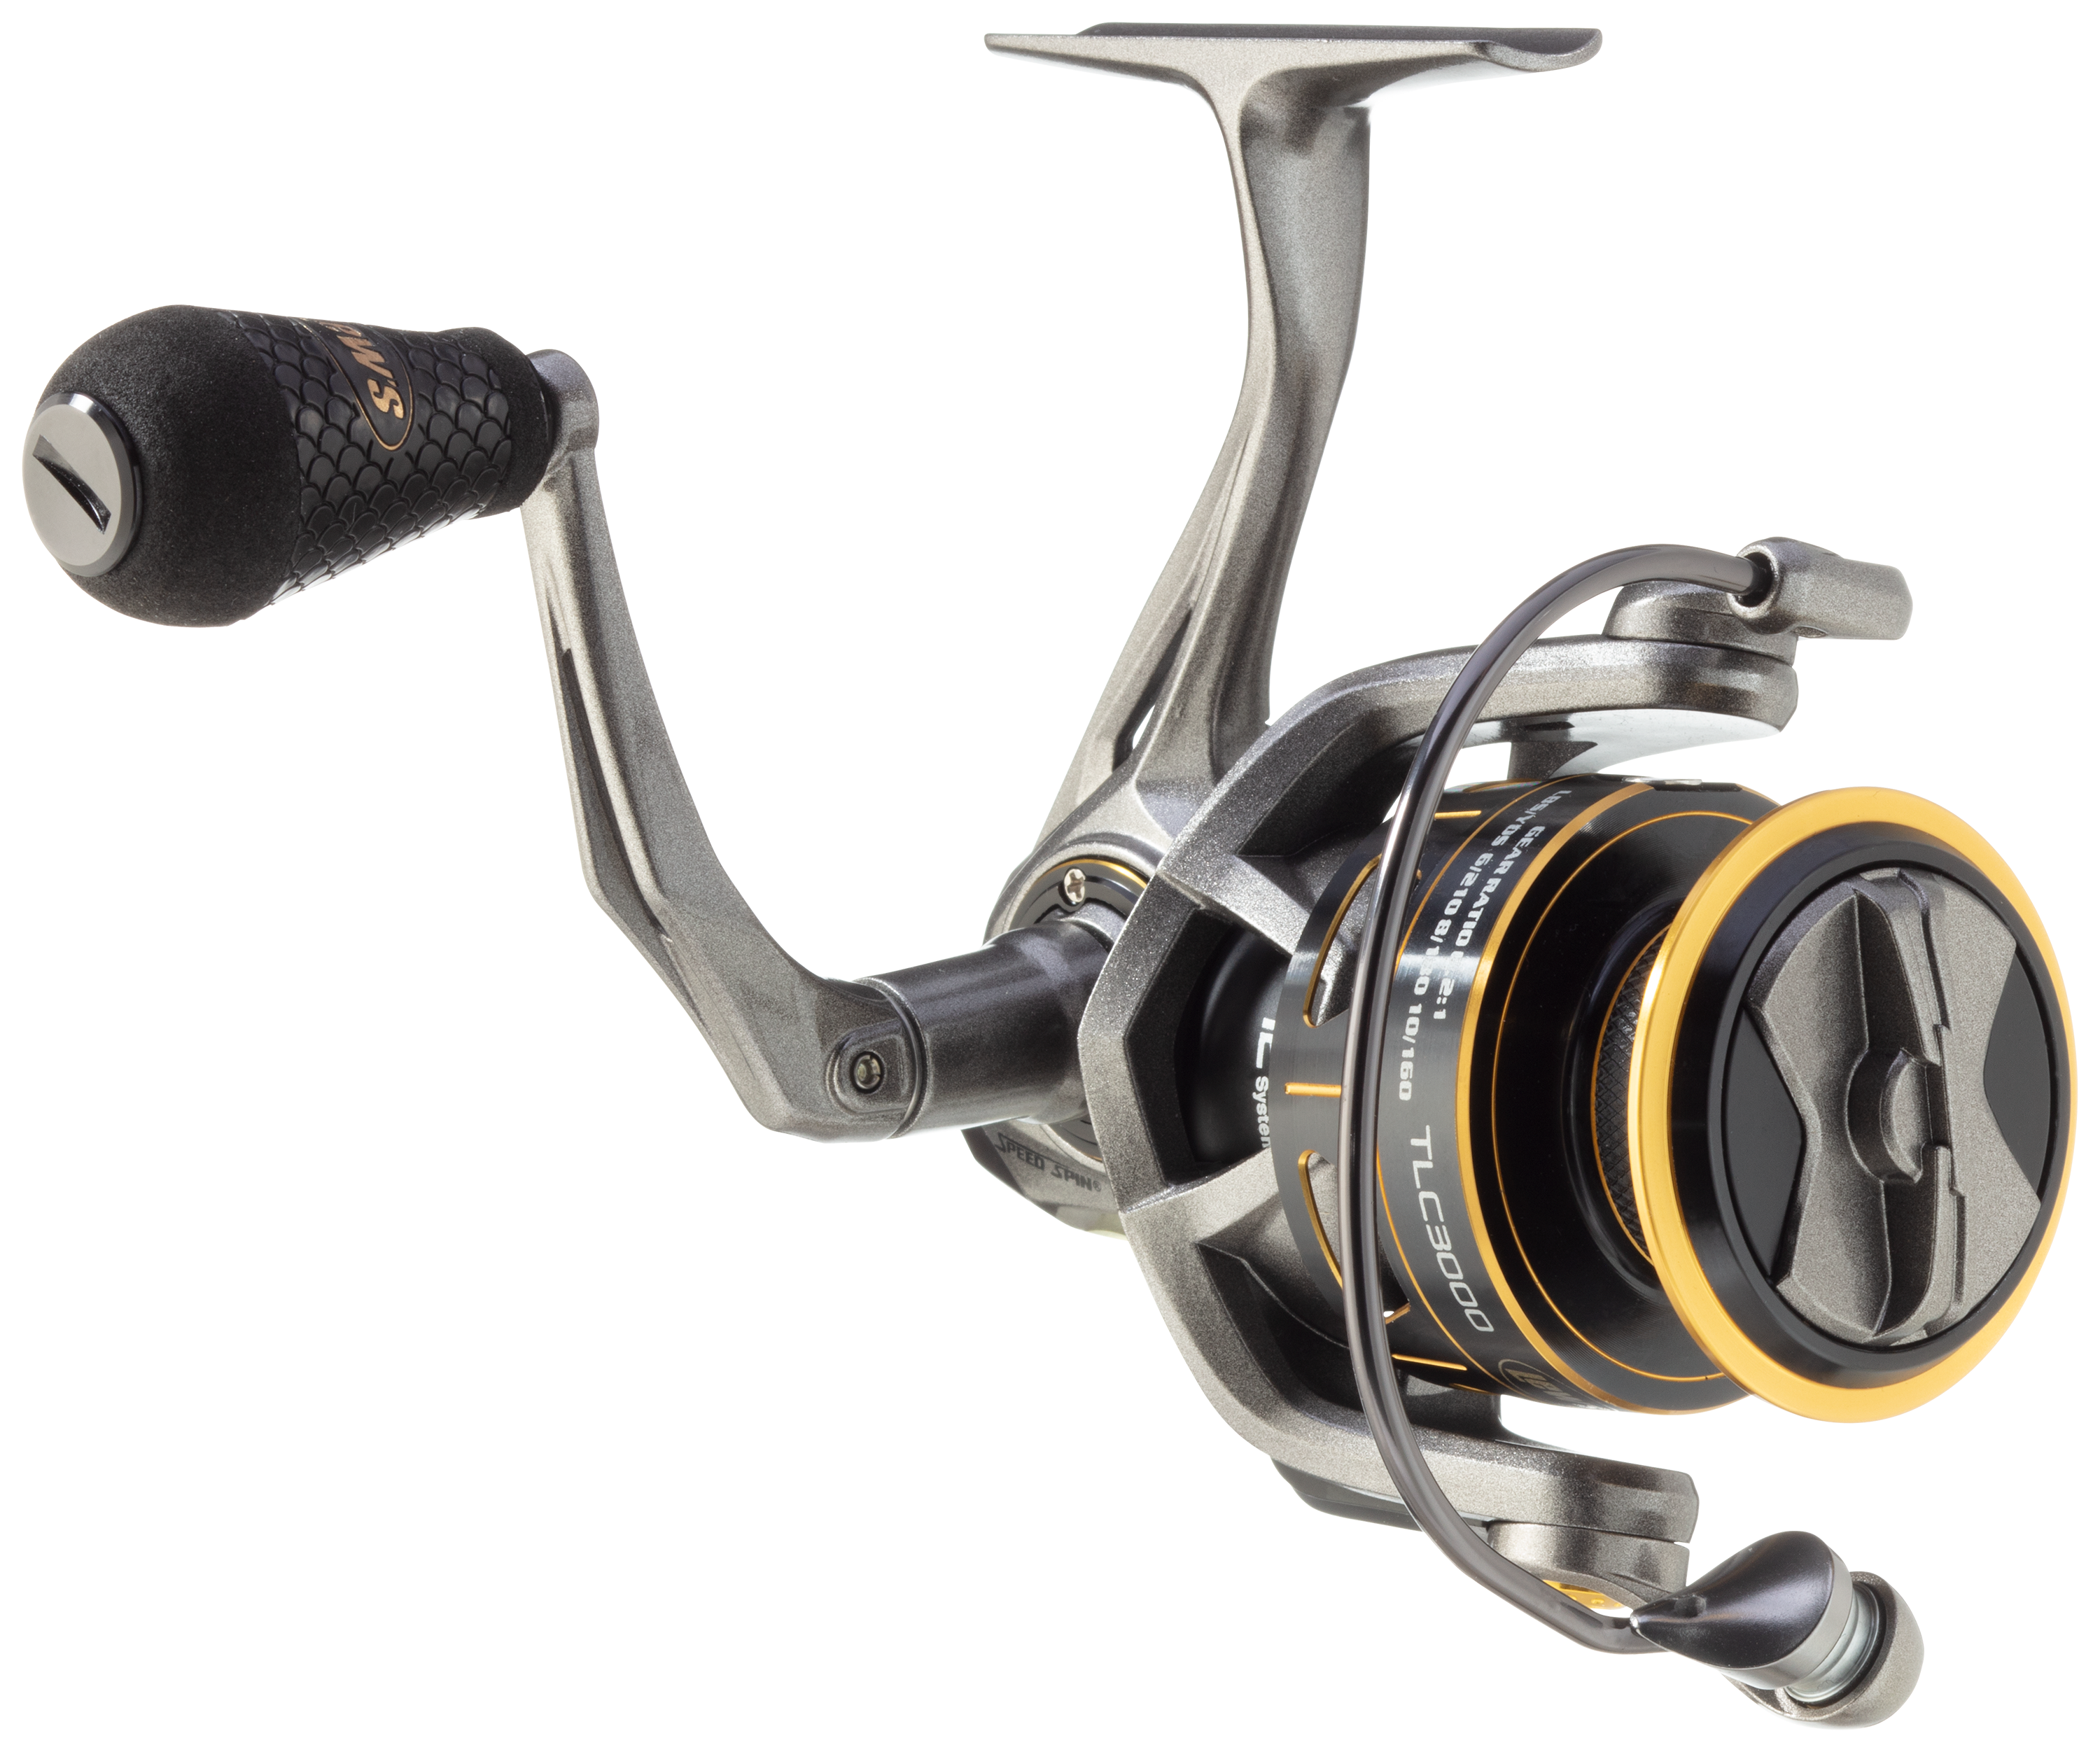 Team Lew's Custom Pro Speed Spin Spinning Reel - 6.2:1 - 2000 Size